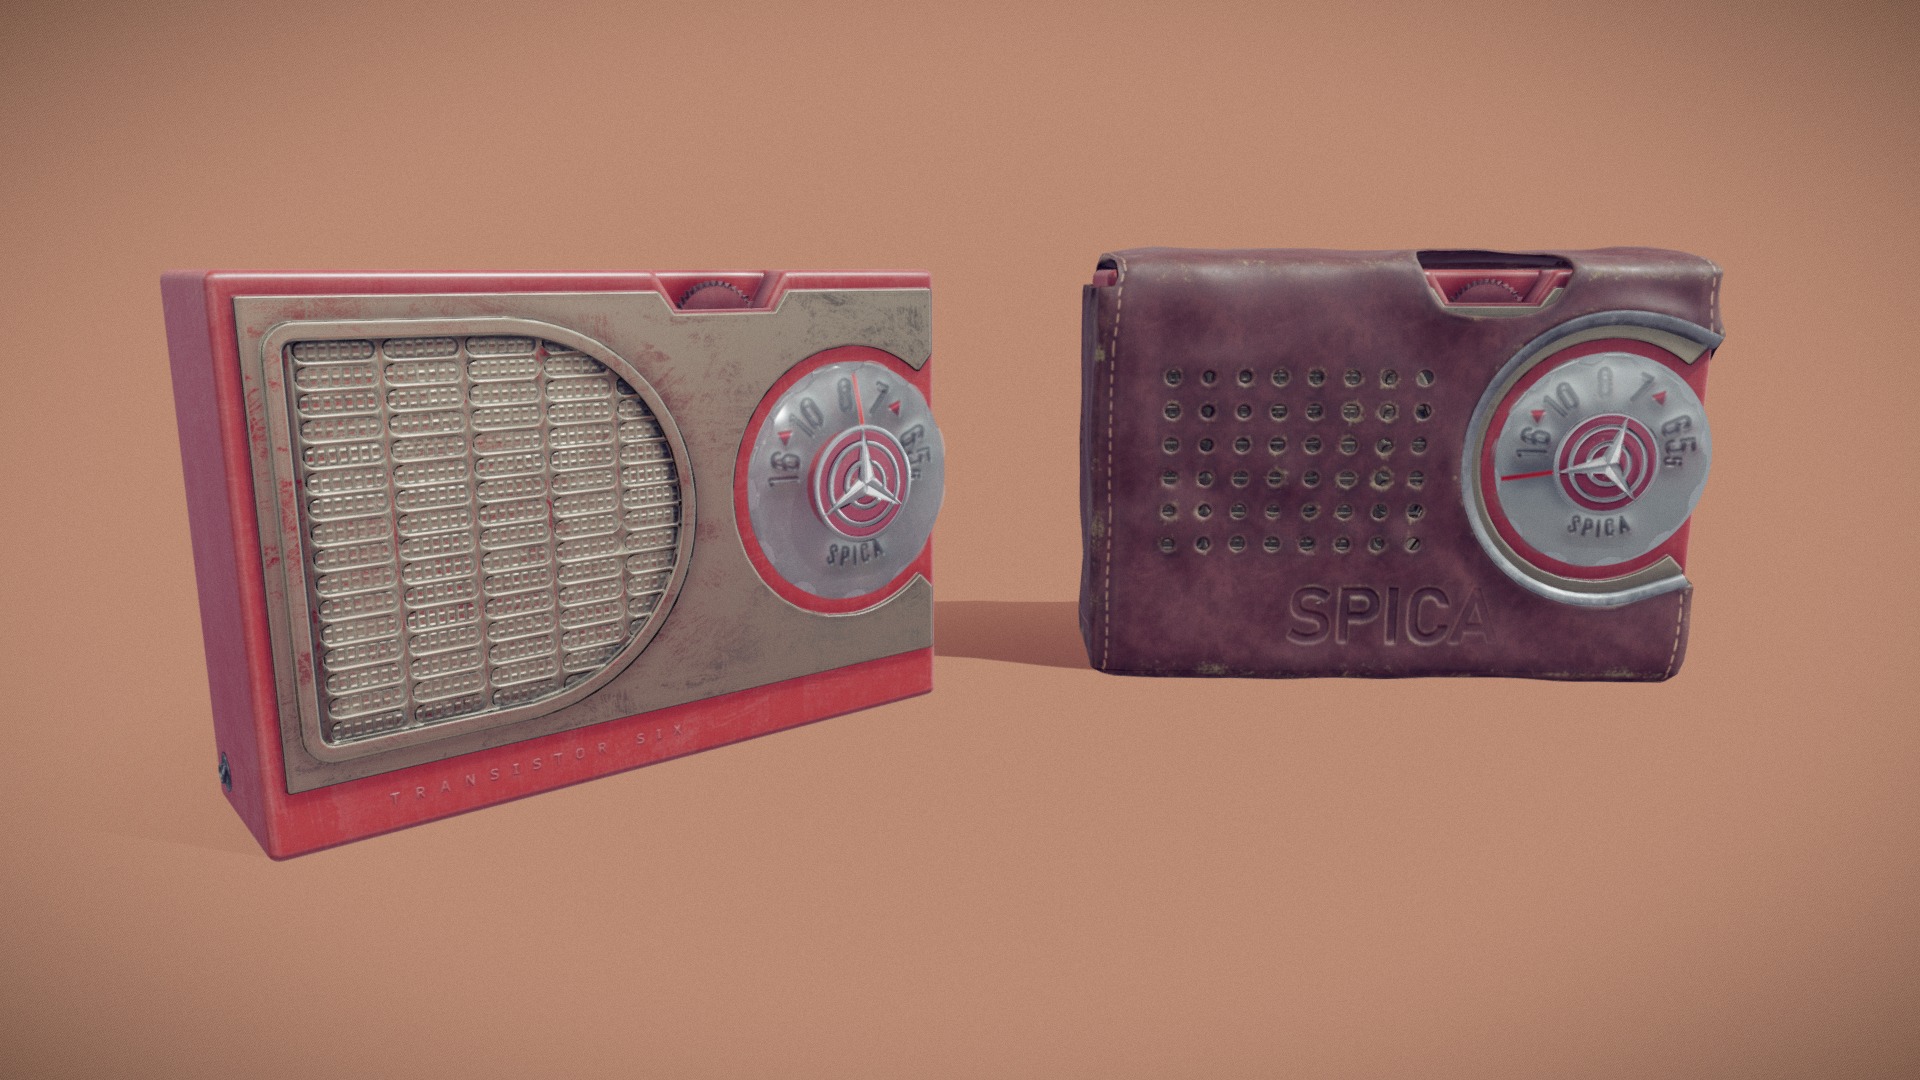 3D model Radio Spica st-600 - This is a 3D model of the Radio Spica st-600. The 3D model is about a couple of red and silver lighters.